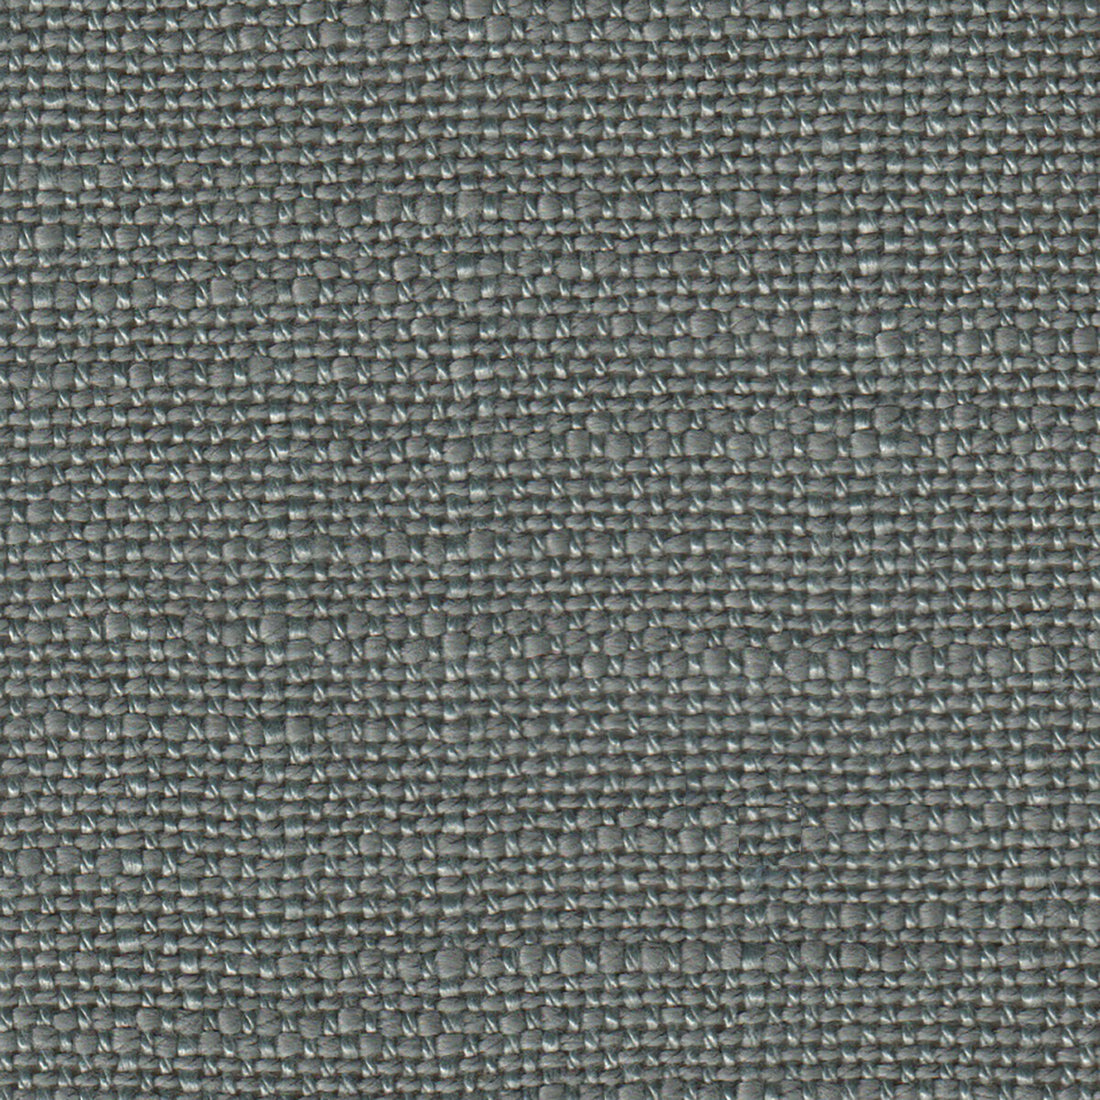 Kravet Contract fabric in 34633-52 color - pattern 34633.52.0 - by Kravet Contract in the Crypton Incase collection